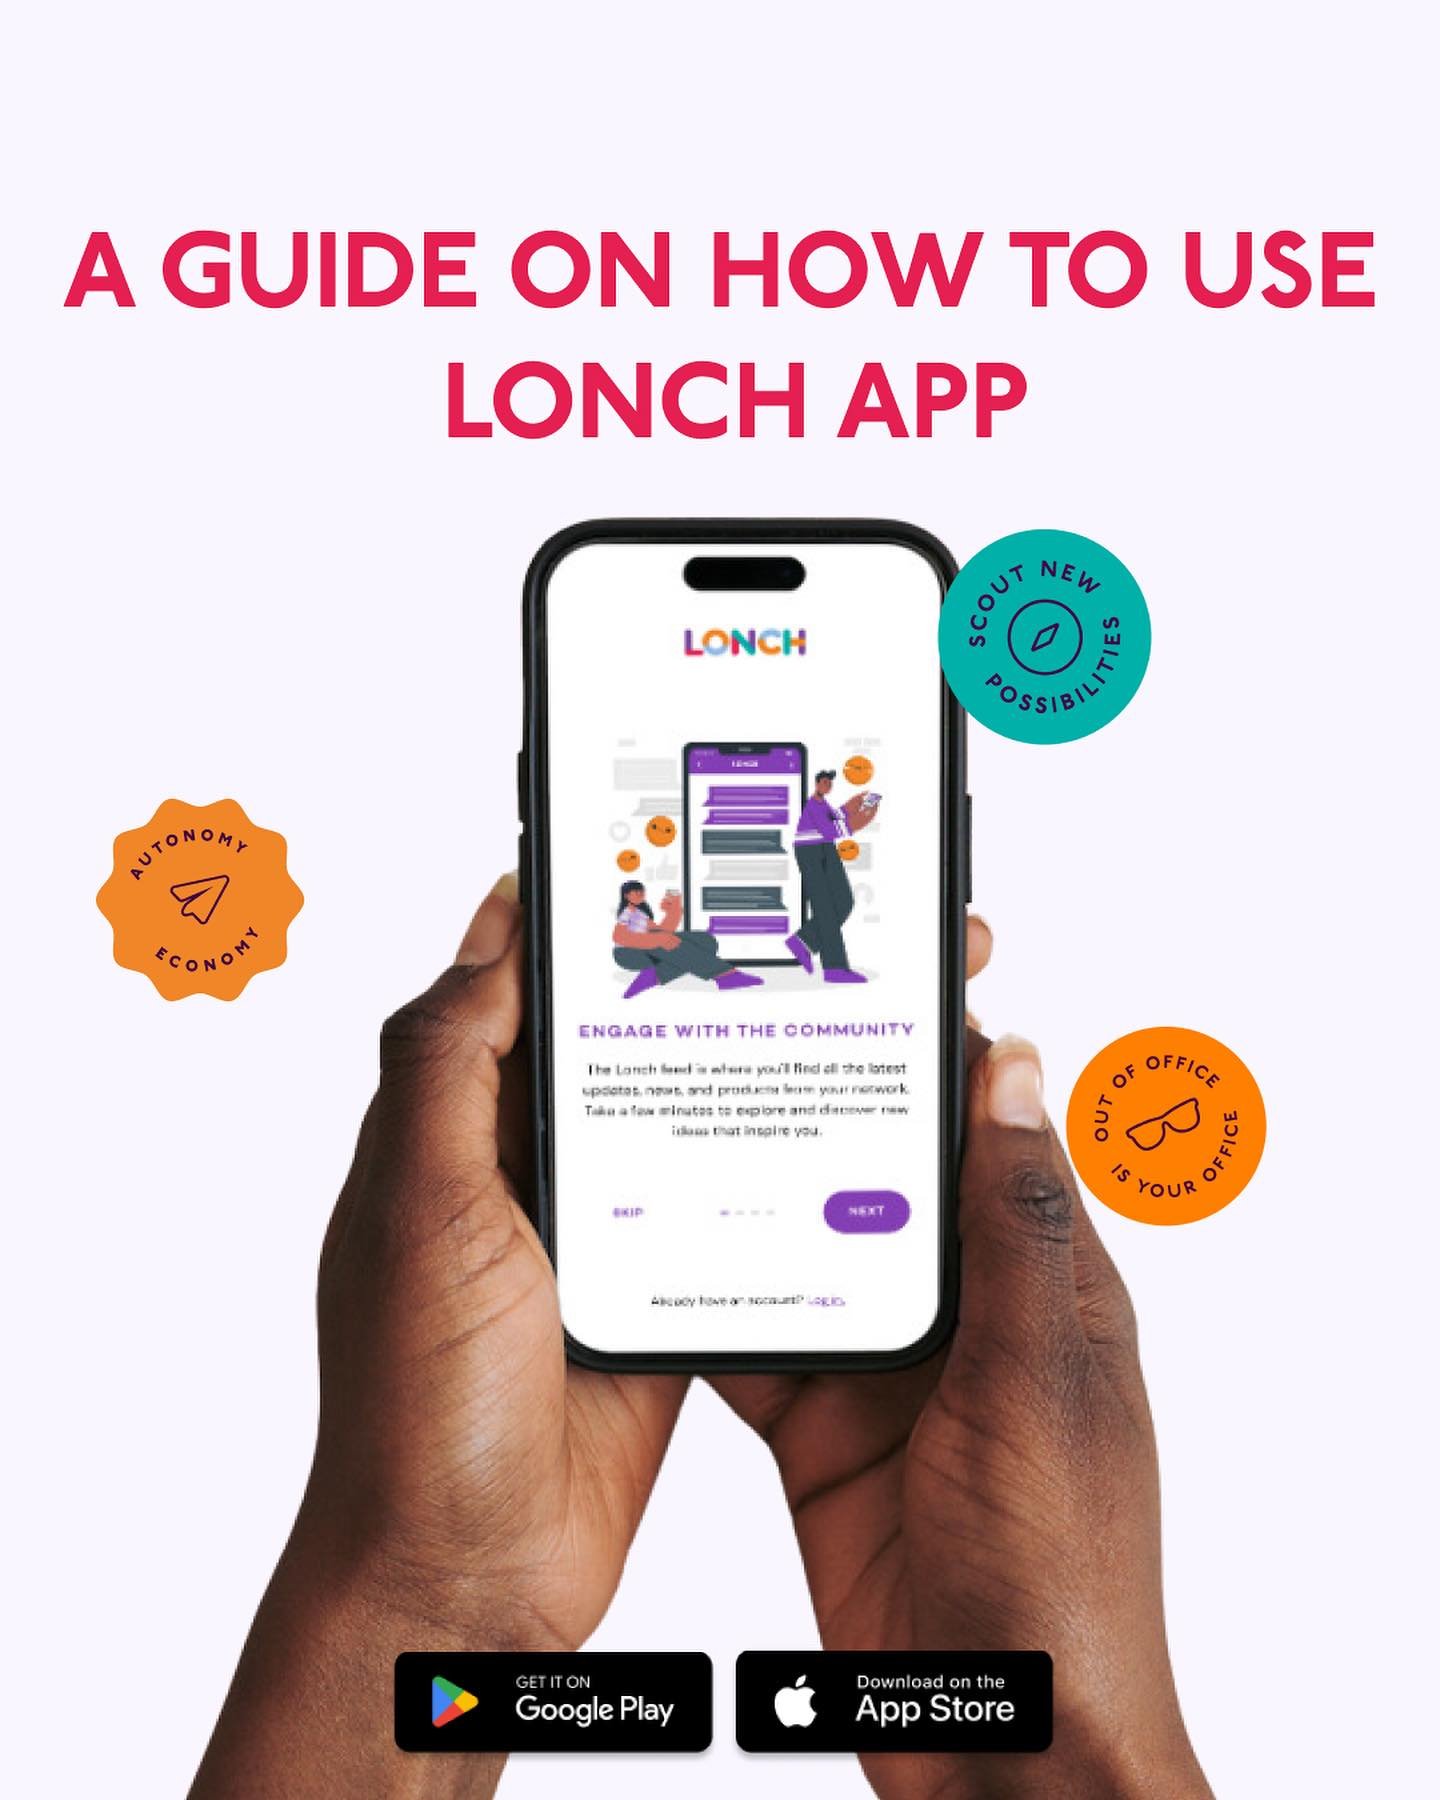 A guide on how to use Lonch for our new users!

#lonchapp 
#guide 
#app